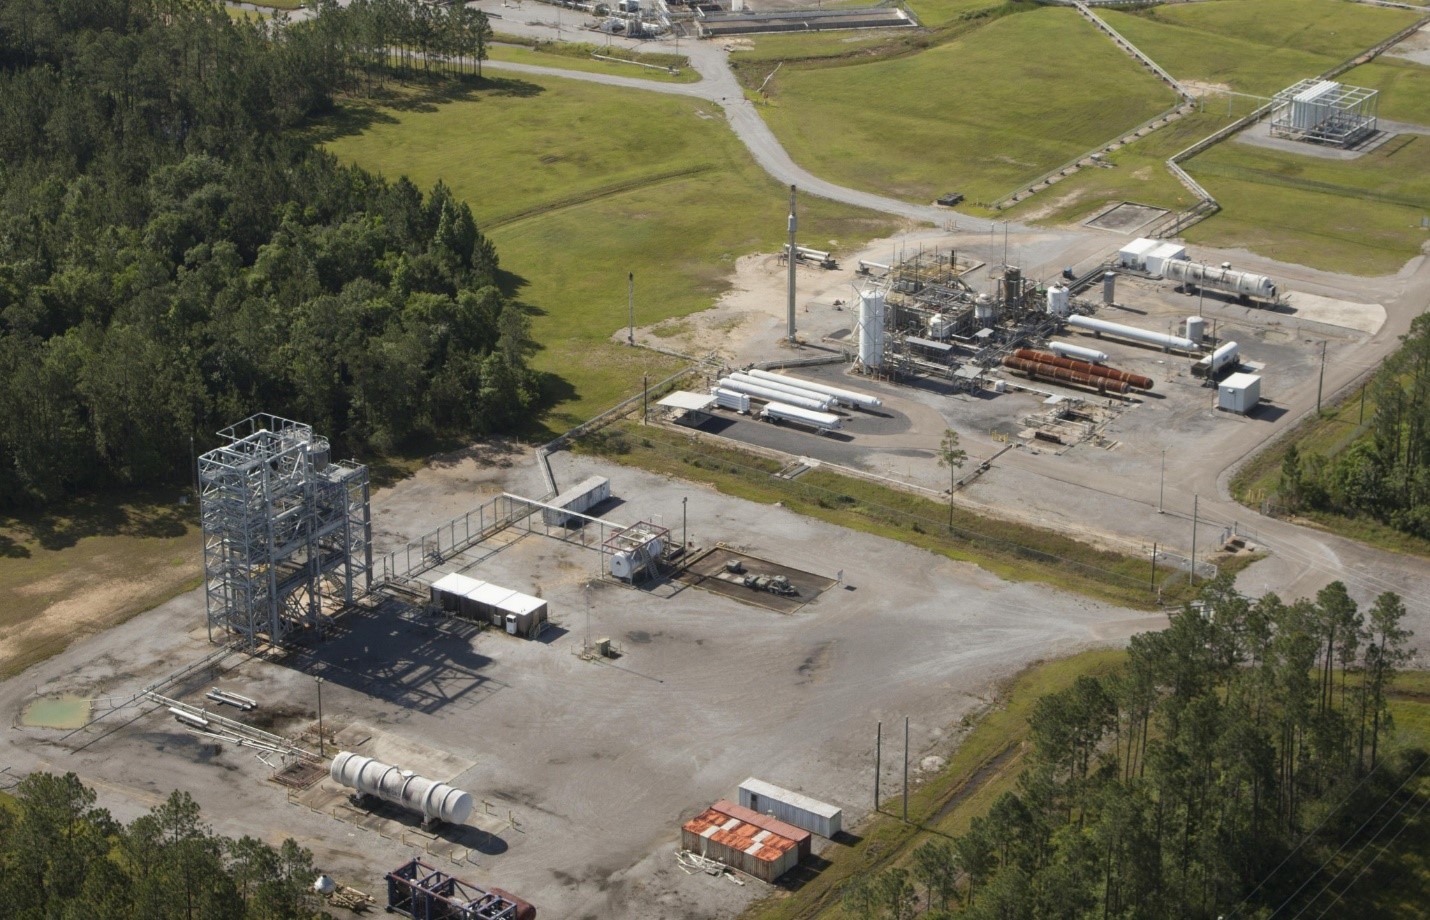 Aerial view of the E-2 Test Facility